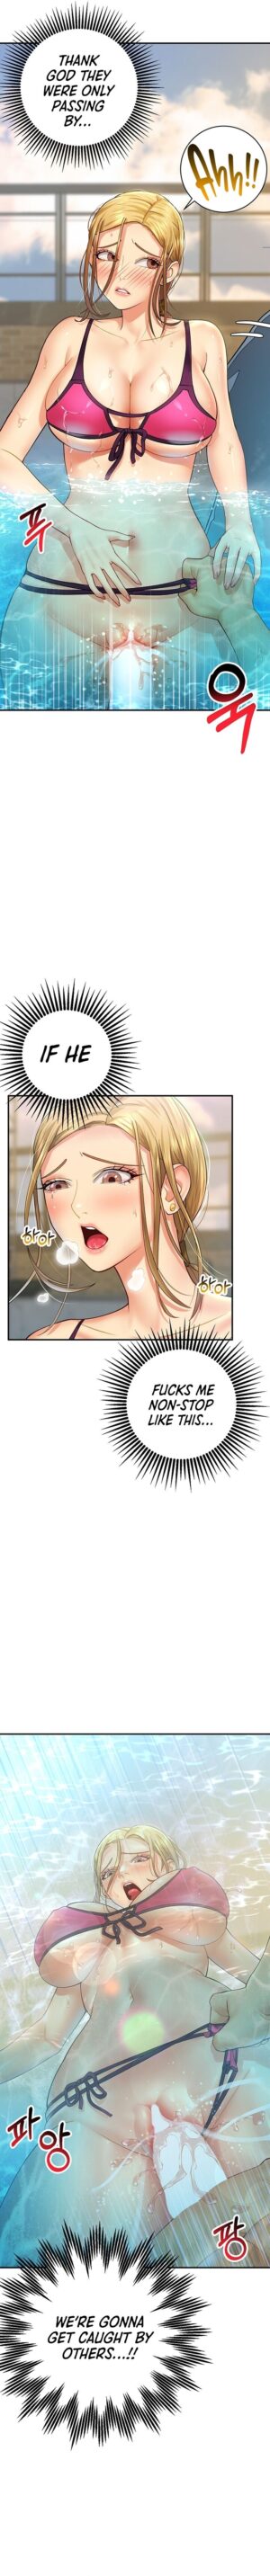 [Peep Show & DongA Writer] Like and Subscribe (1-17) [English] [Omega Scans] [Ongoing]